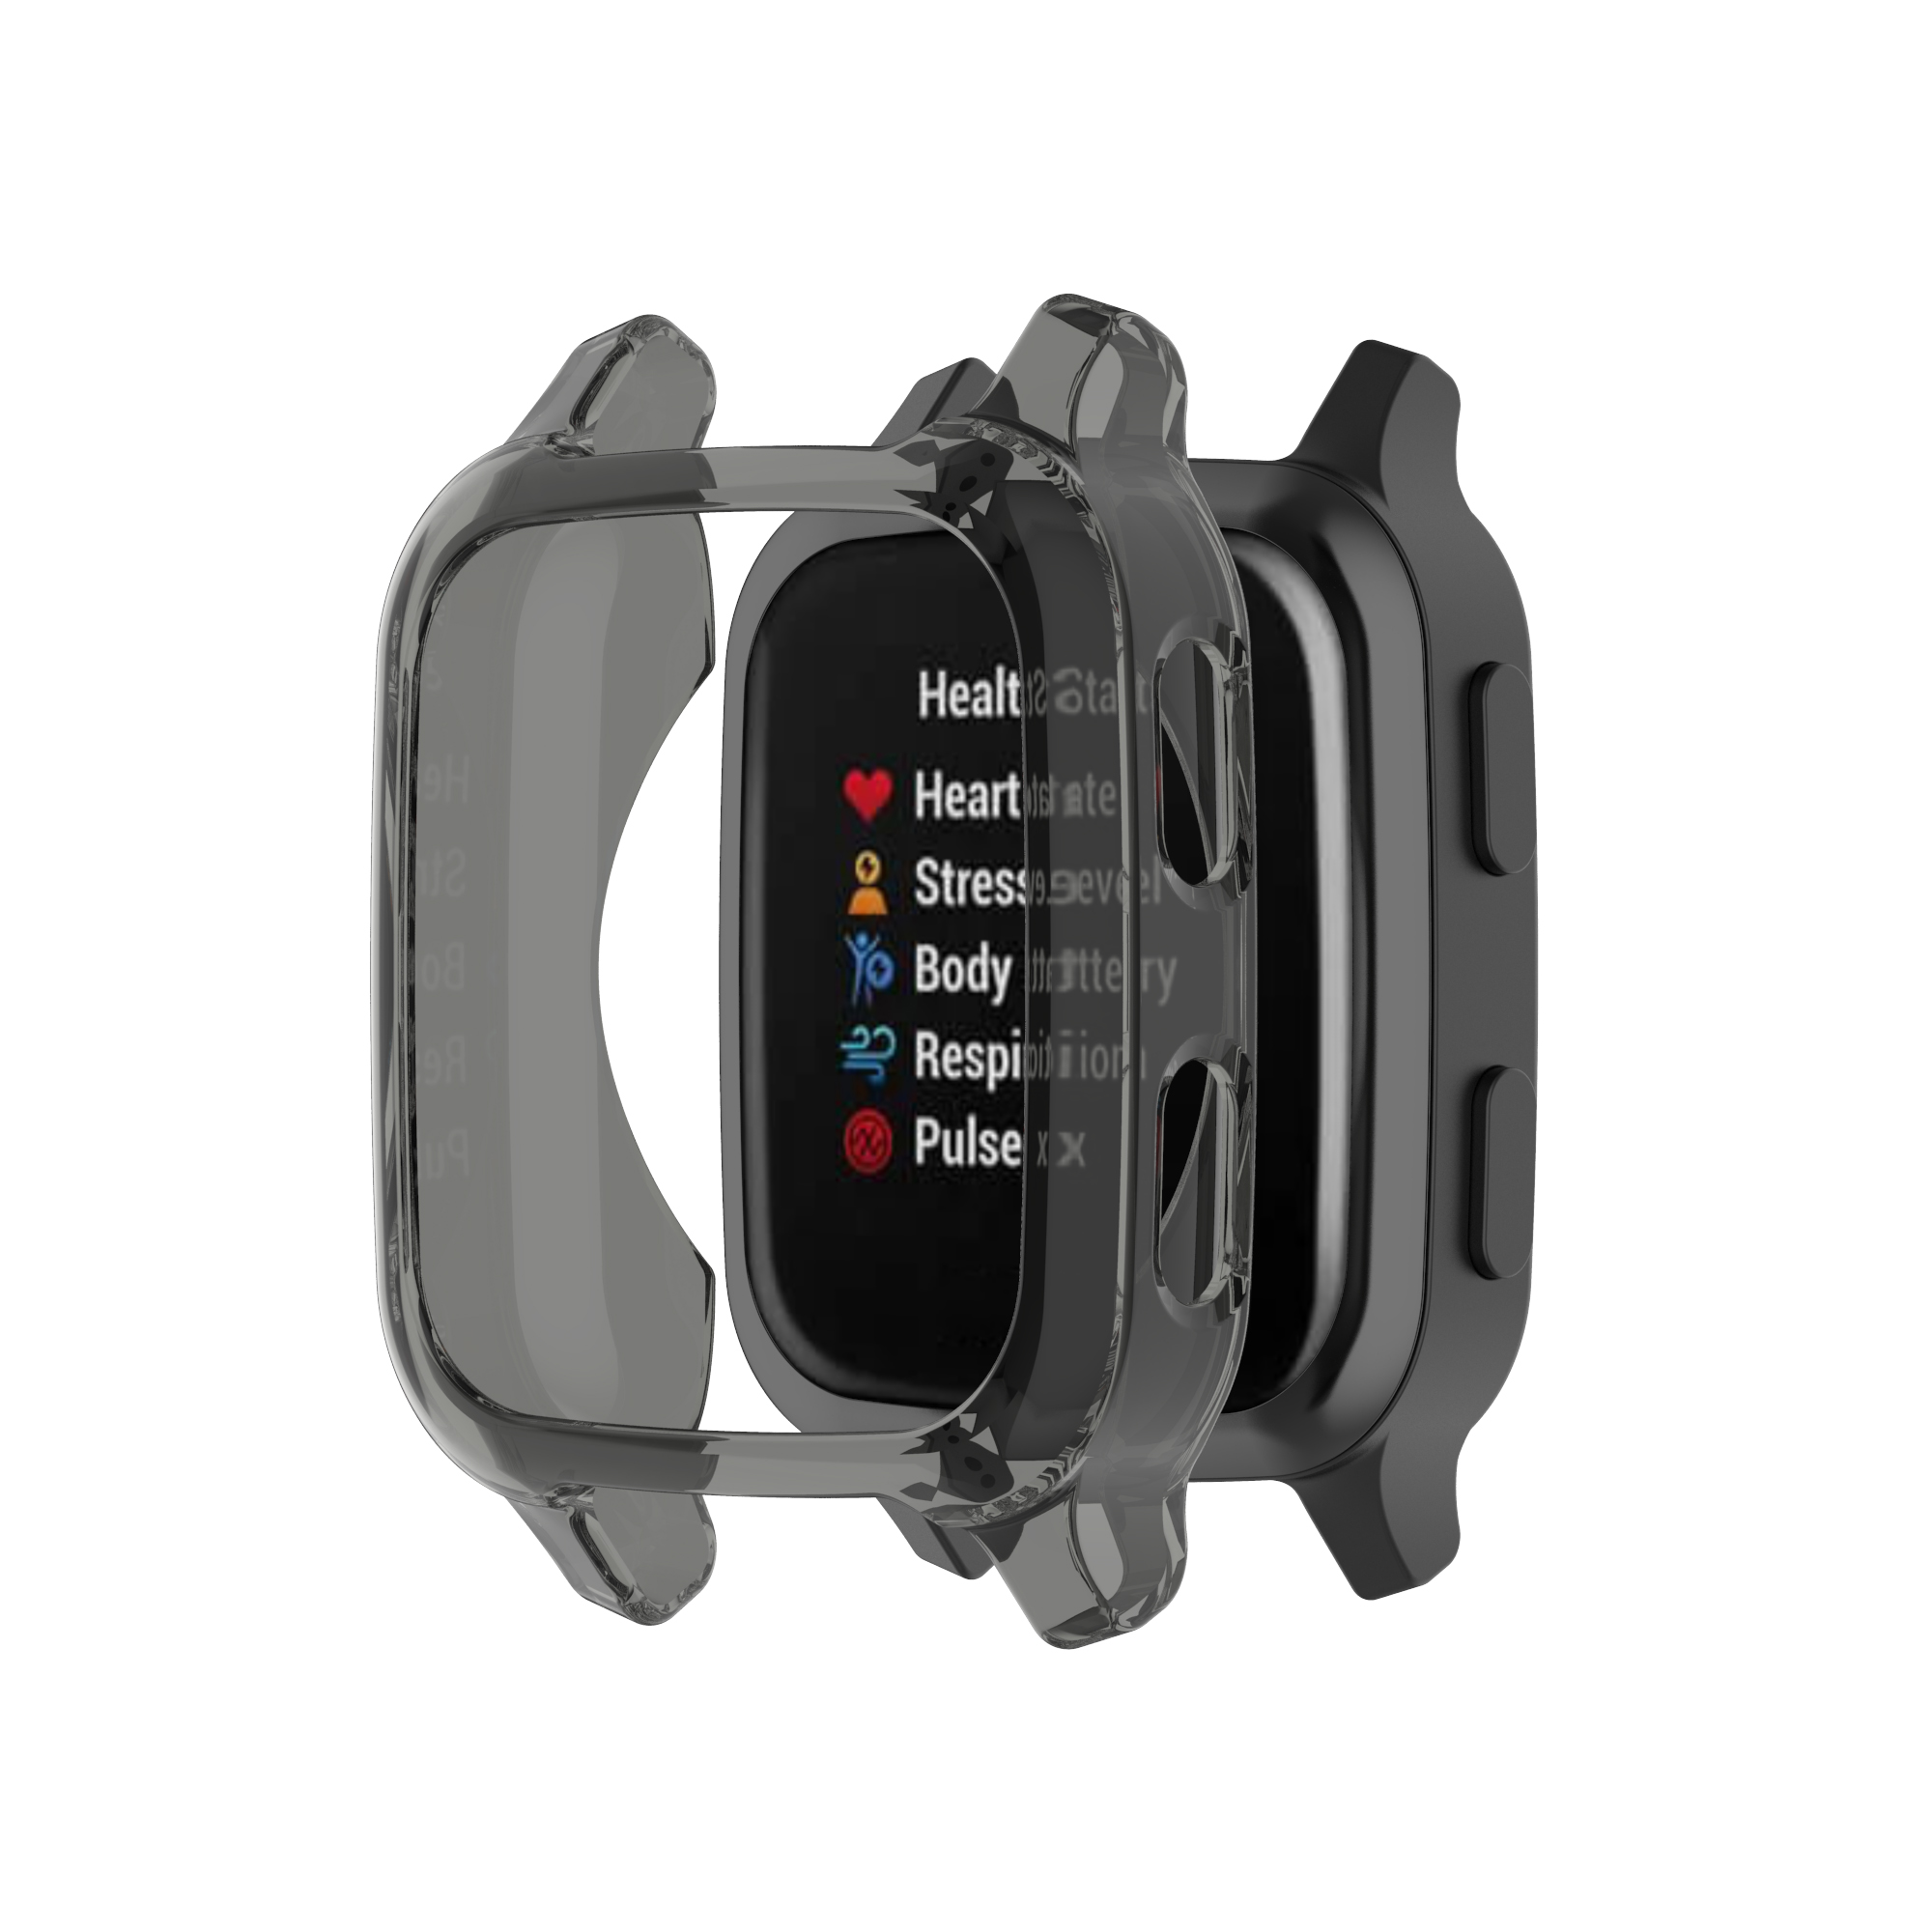 Bakeey-TPU-Transparent-Half-pack-Watch-Case-Cover-Watch-Shell-Protector-For-Garmin-Venu-sq-1791985-1